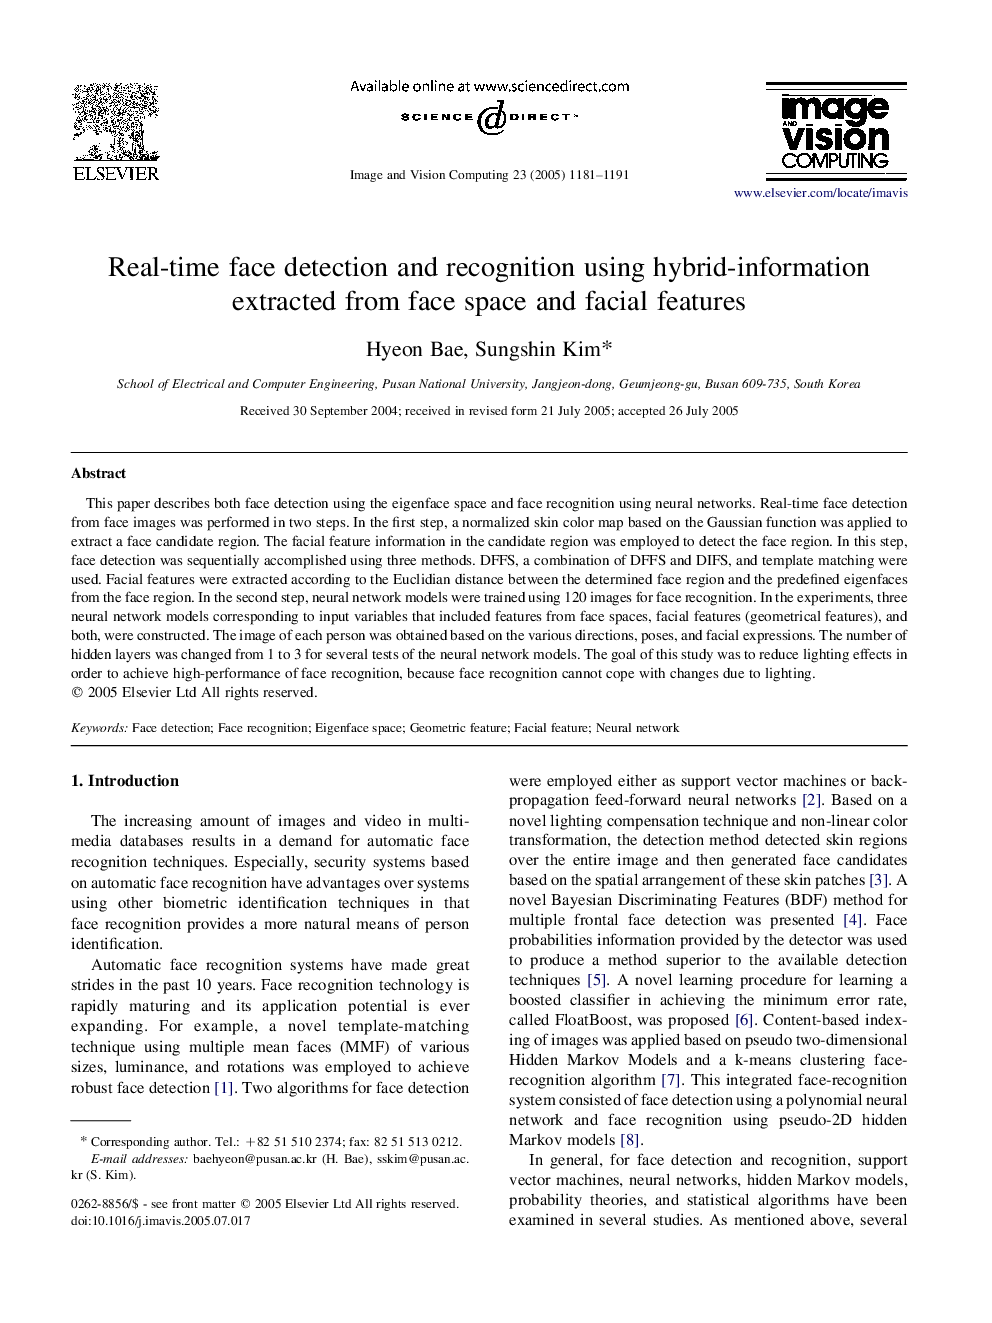 Real-time face detection and recognition using hybrid-information extracted from face space and facial features